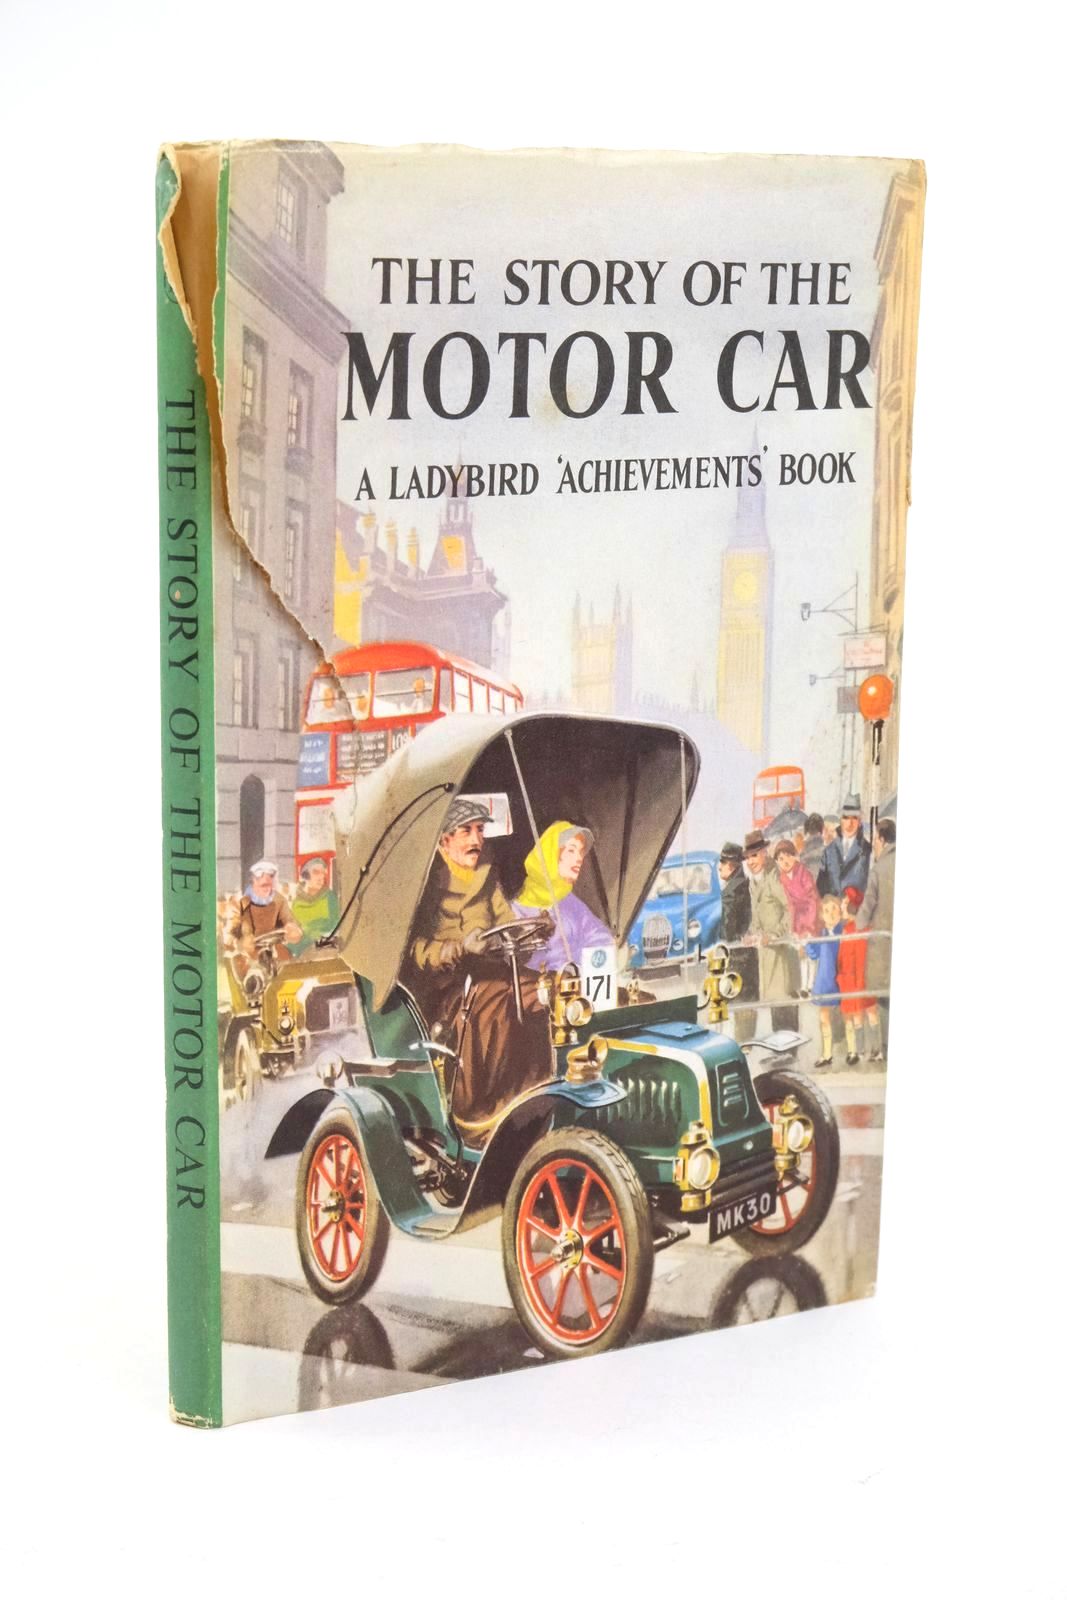 Photo of THE STORY OF THE MOTOR CAR written by Carey, David illustrated by Ayton, Robert published by Wills & Hepworth Ltd. (STOCK CODE: 1322136)  for sale by Stella & Rose's Books